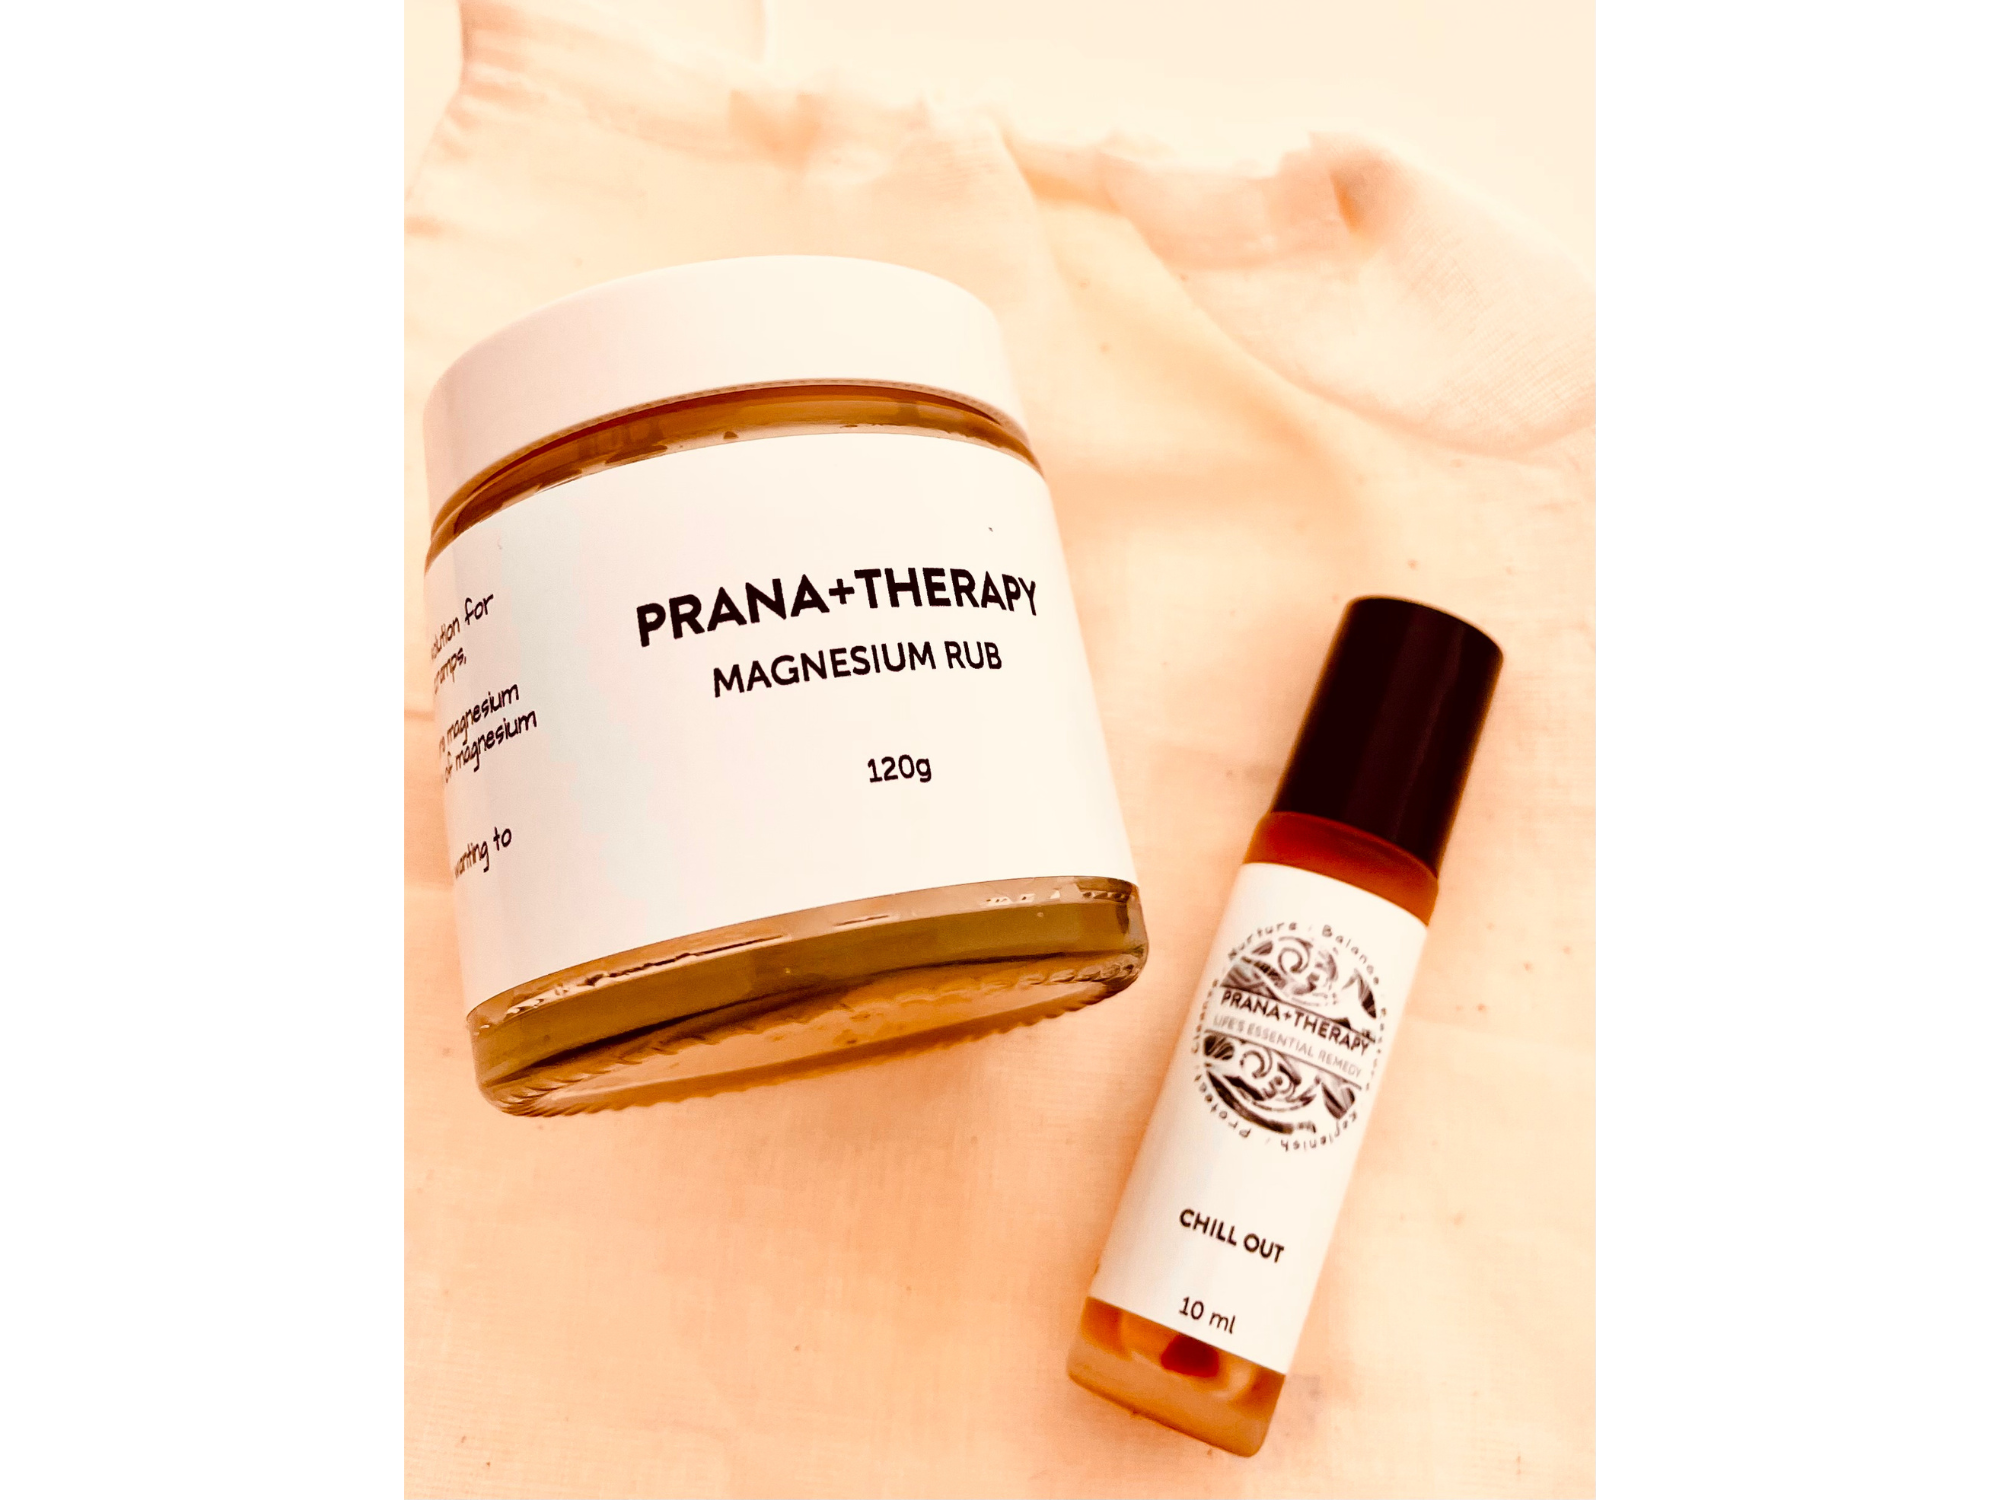 Prana+Therapy infused magnesium rub & CHILL OUT Wellness Bundle